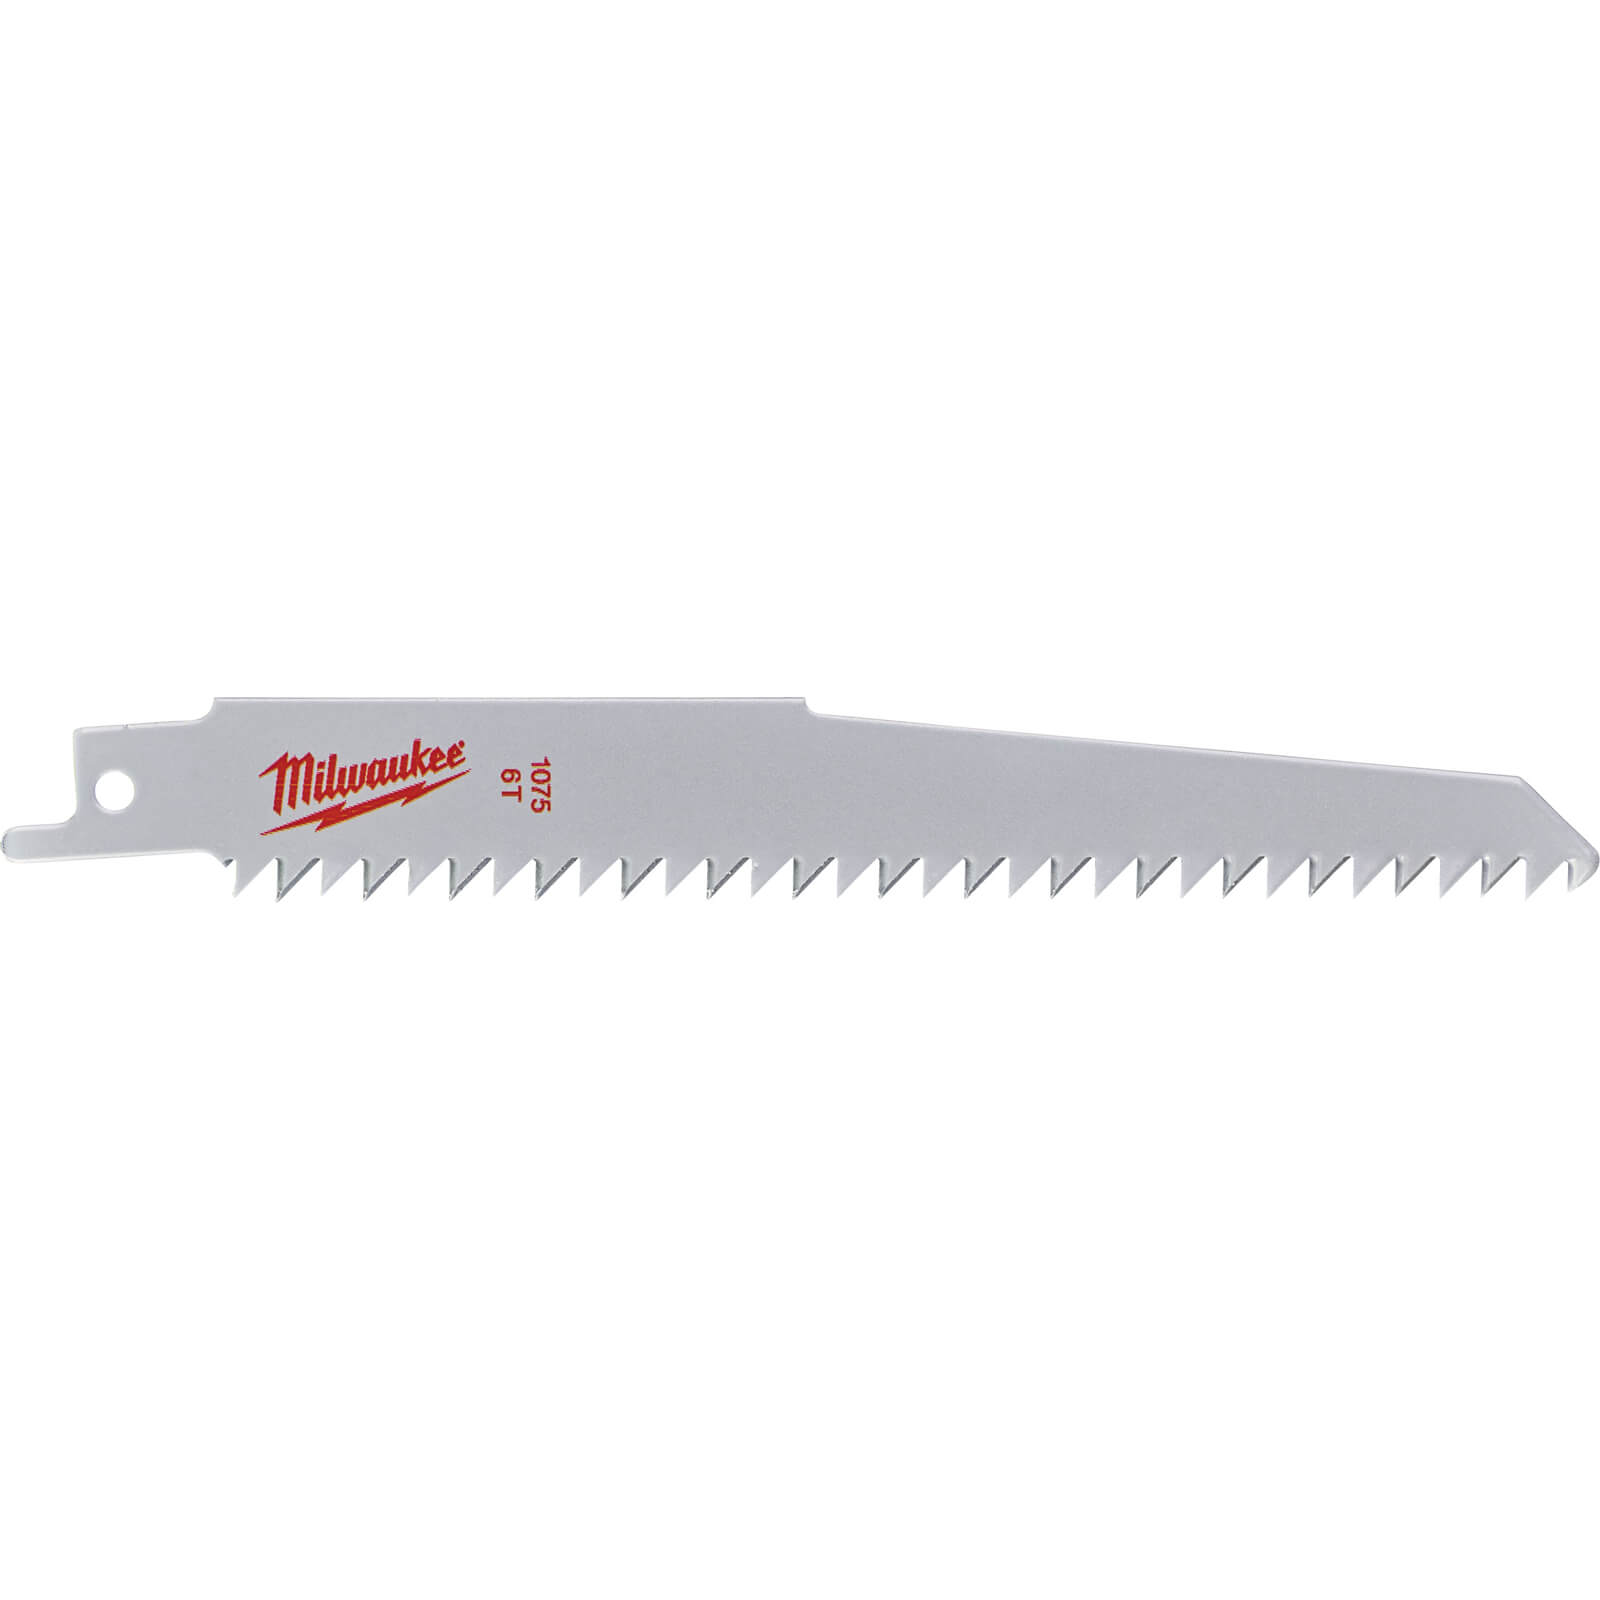 Image of Milwaukee S644D Wood and Plastic Saw Blades 150mm Pack of 3